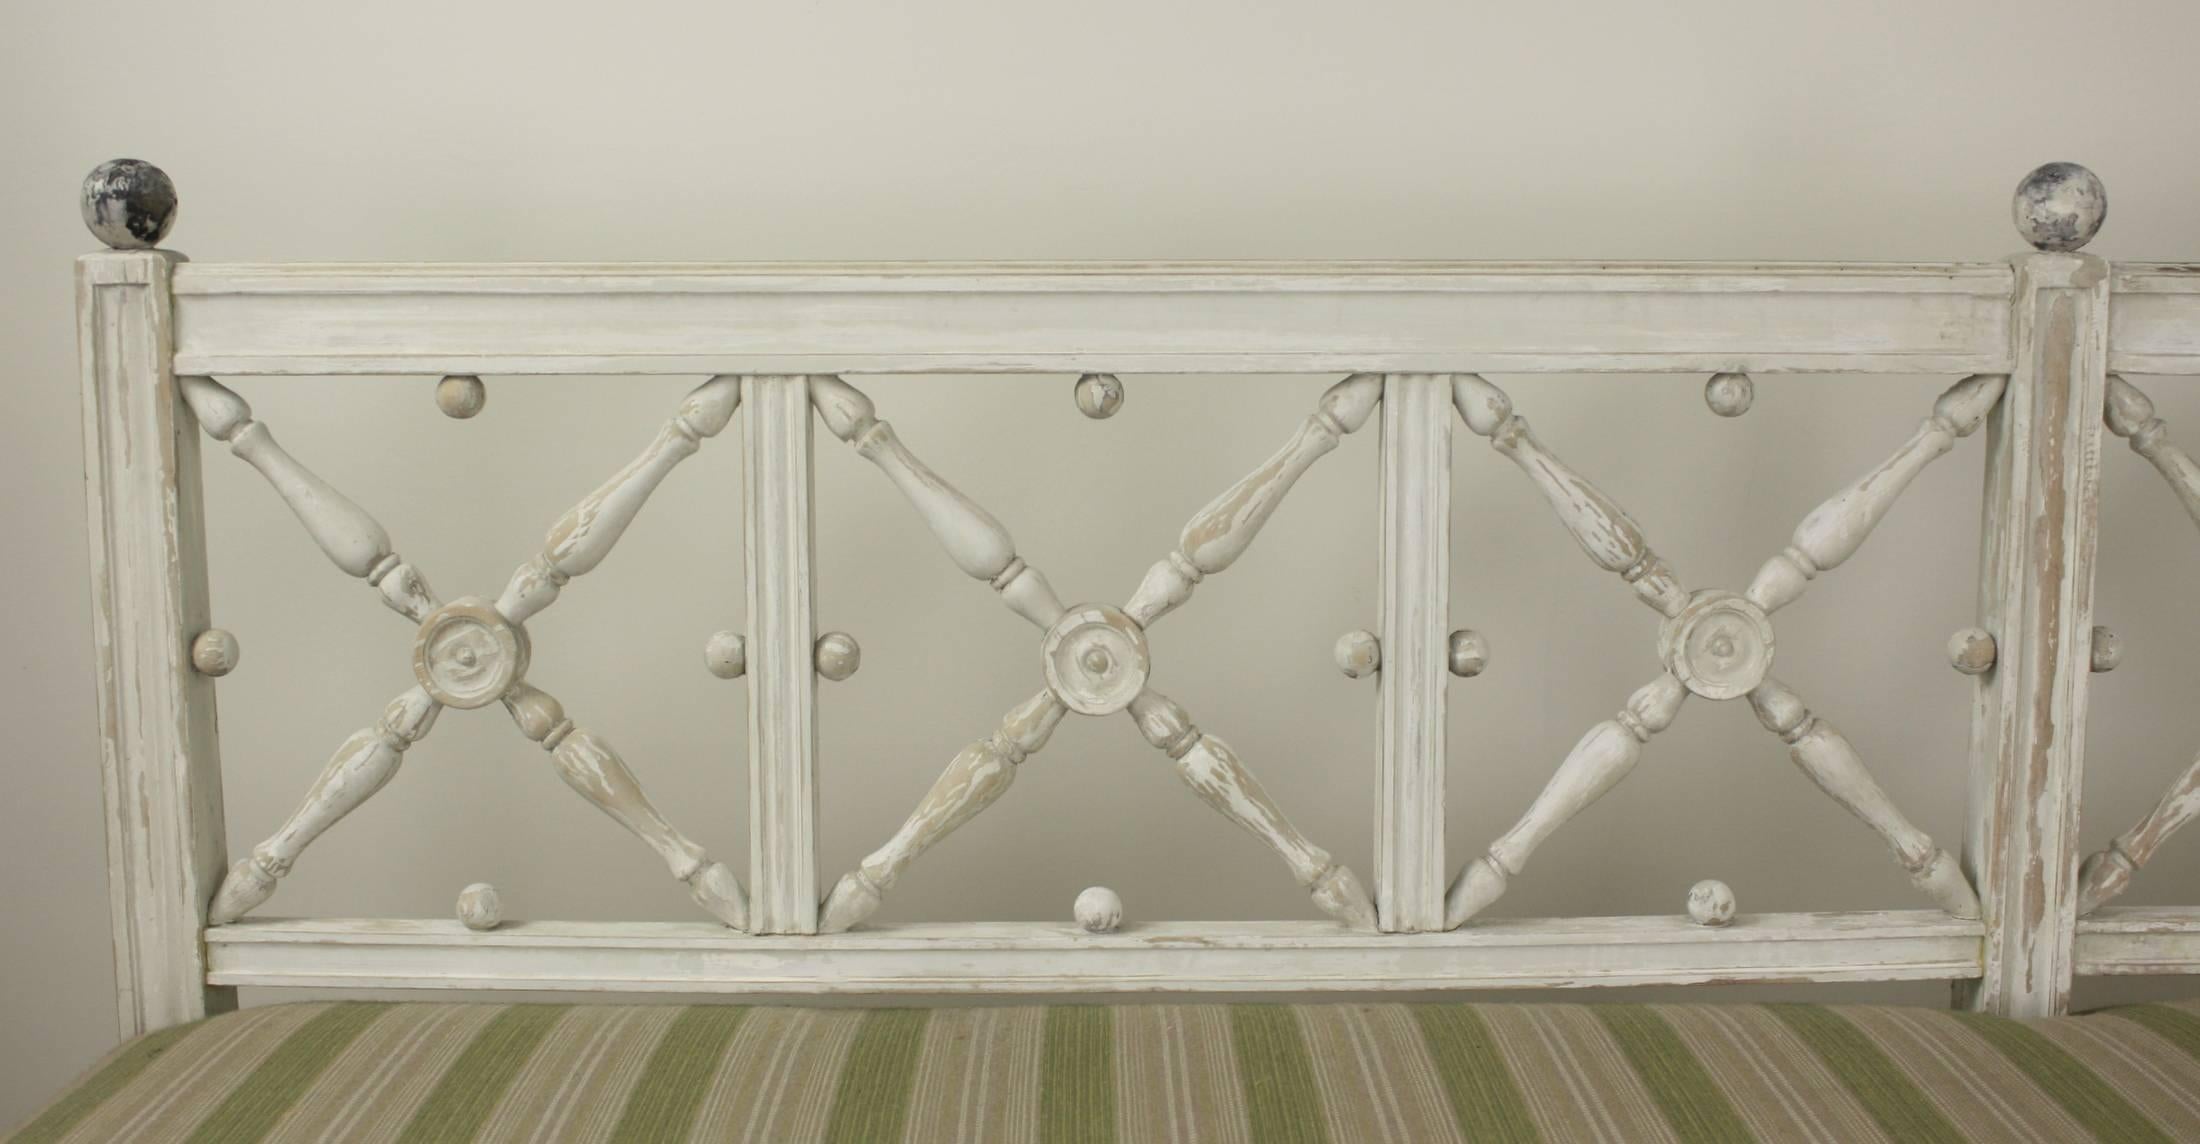 A stunning seven foot long Gustavian bench, very decorative with rubbed-back old paint. The 